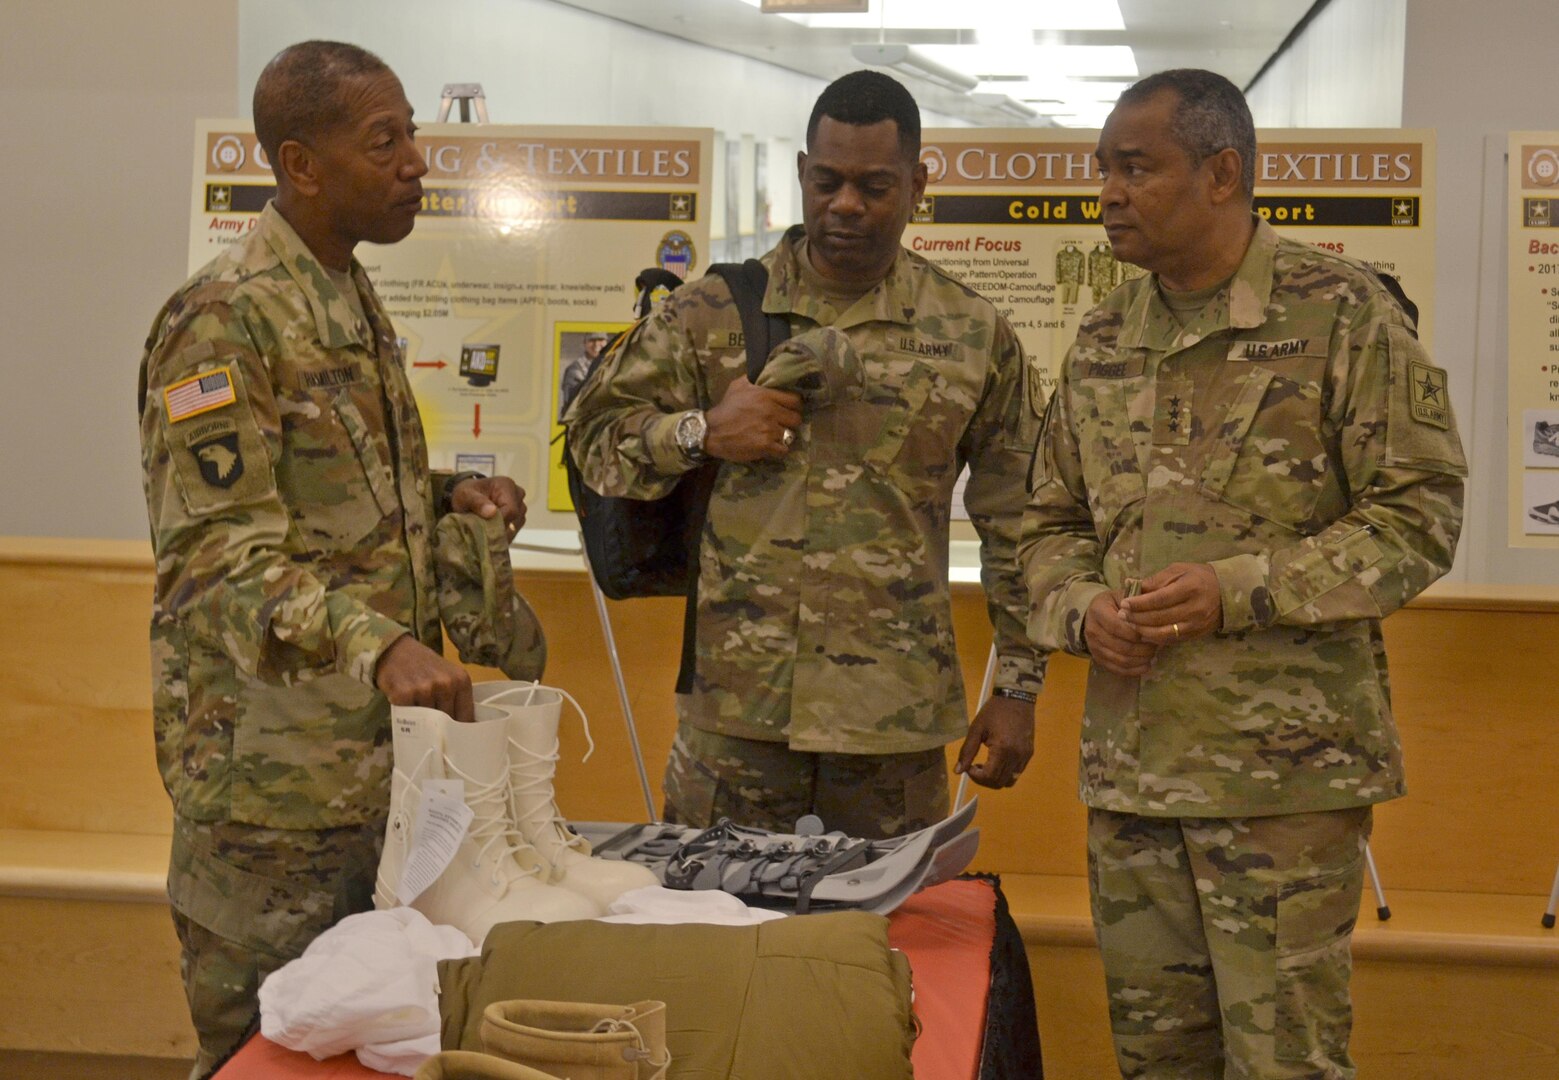 From left to right, Army Brig. Gen. Charles Hamilton, DLA Troop Support commander; Sgt. Maj. Edward Bell, Army G4 senior enlisted advisor; and Lt. Gen. Aundre Piggee, Army deputy chief of staff G4, discuss cold weather boots and other materials that Troop Support’s Clothing and Textiles supply chain provides to the Army. Piggee and Bell visited Troop Support in Philadelphia June 5. 